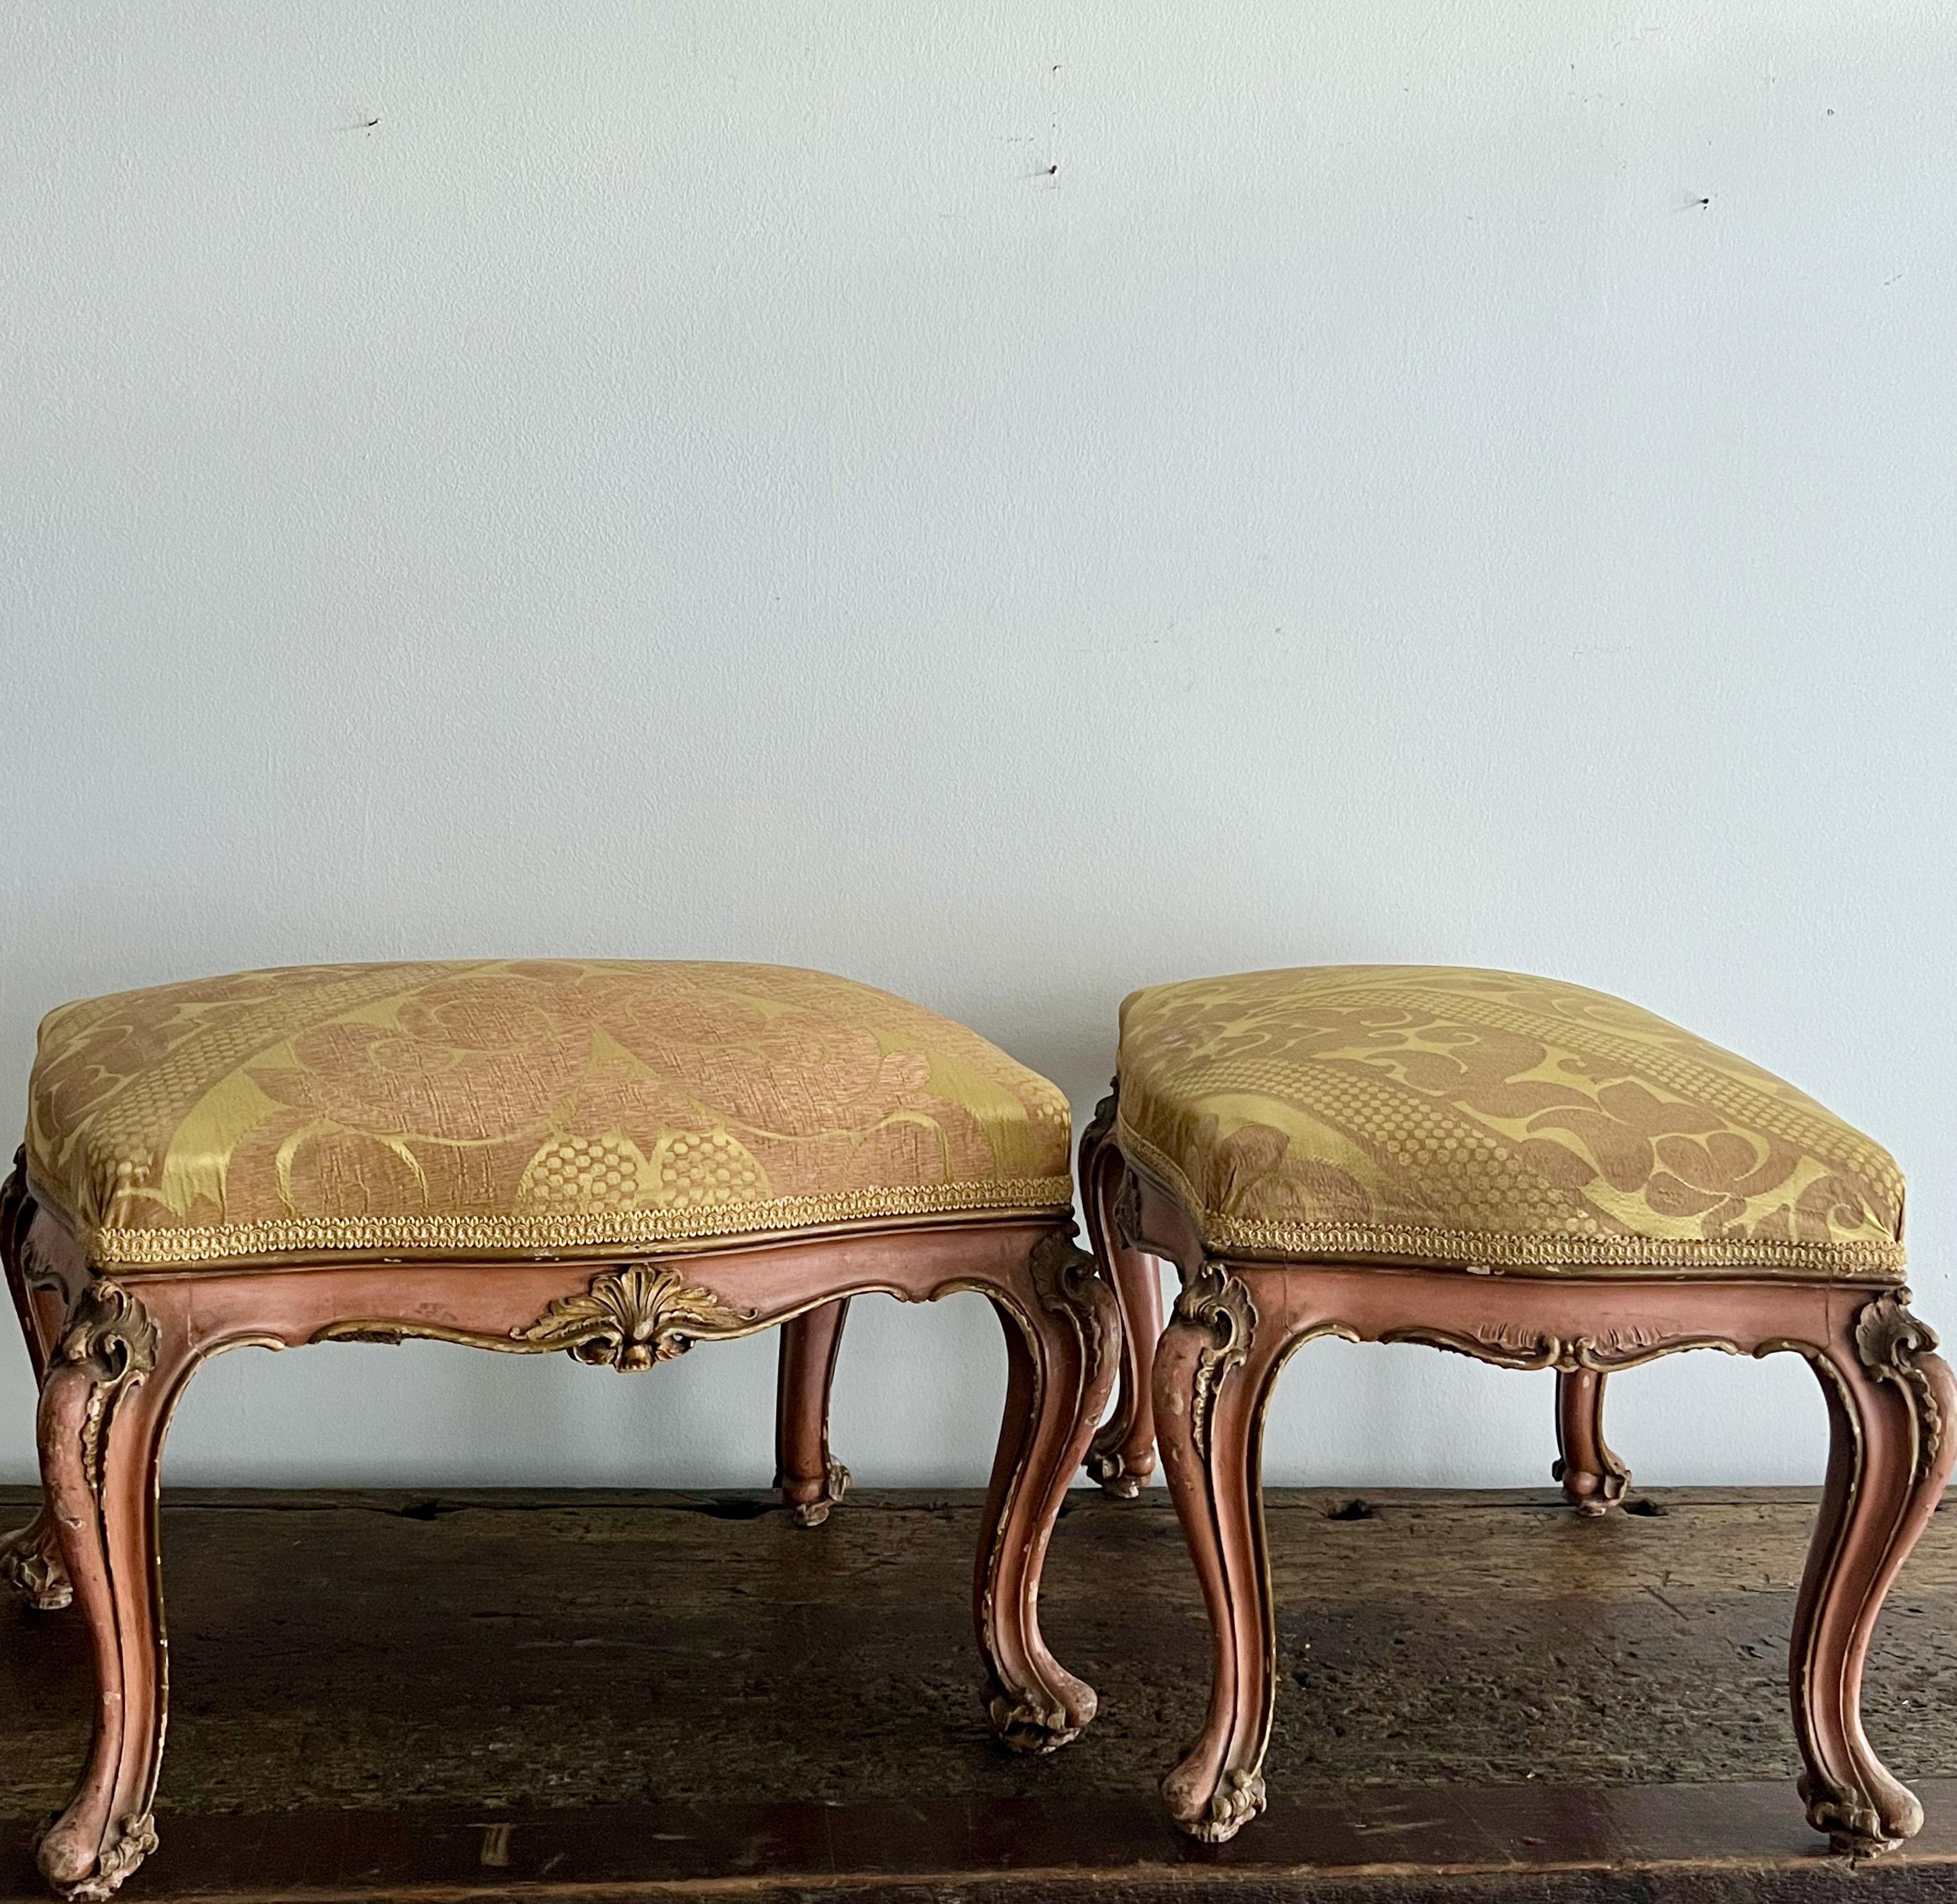 Pair of 19th century Italian Painted Footstools  In Good Condition For Sale In Charleston, SC